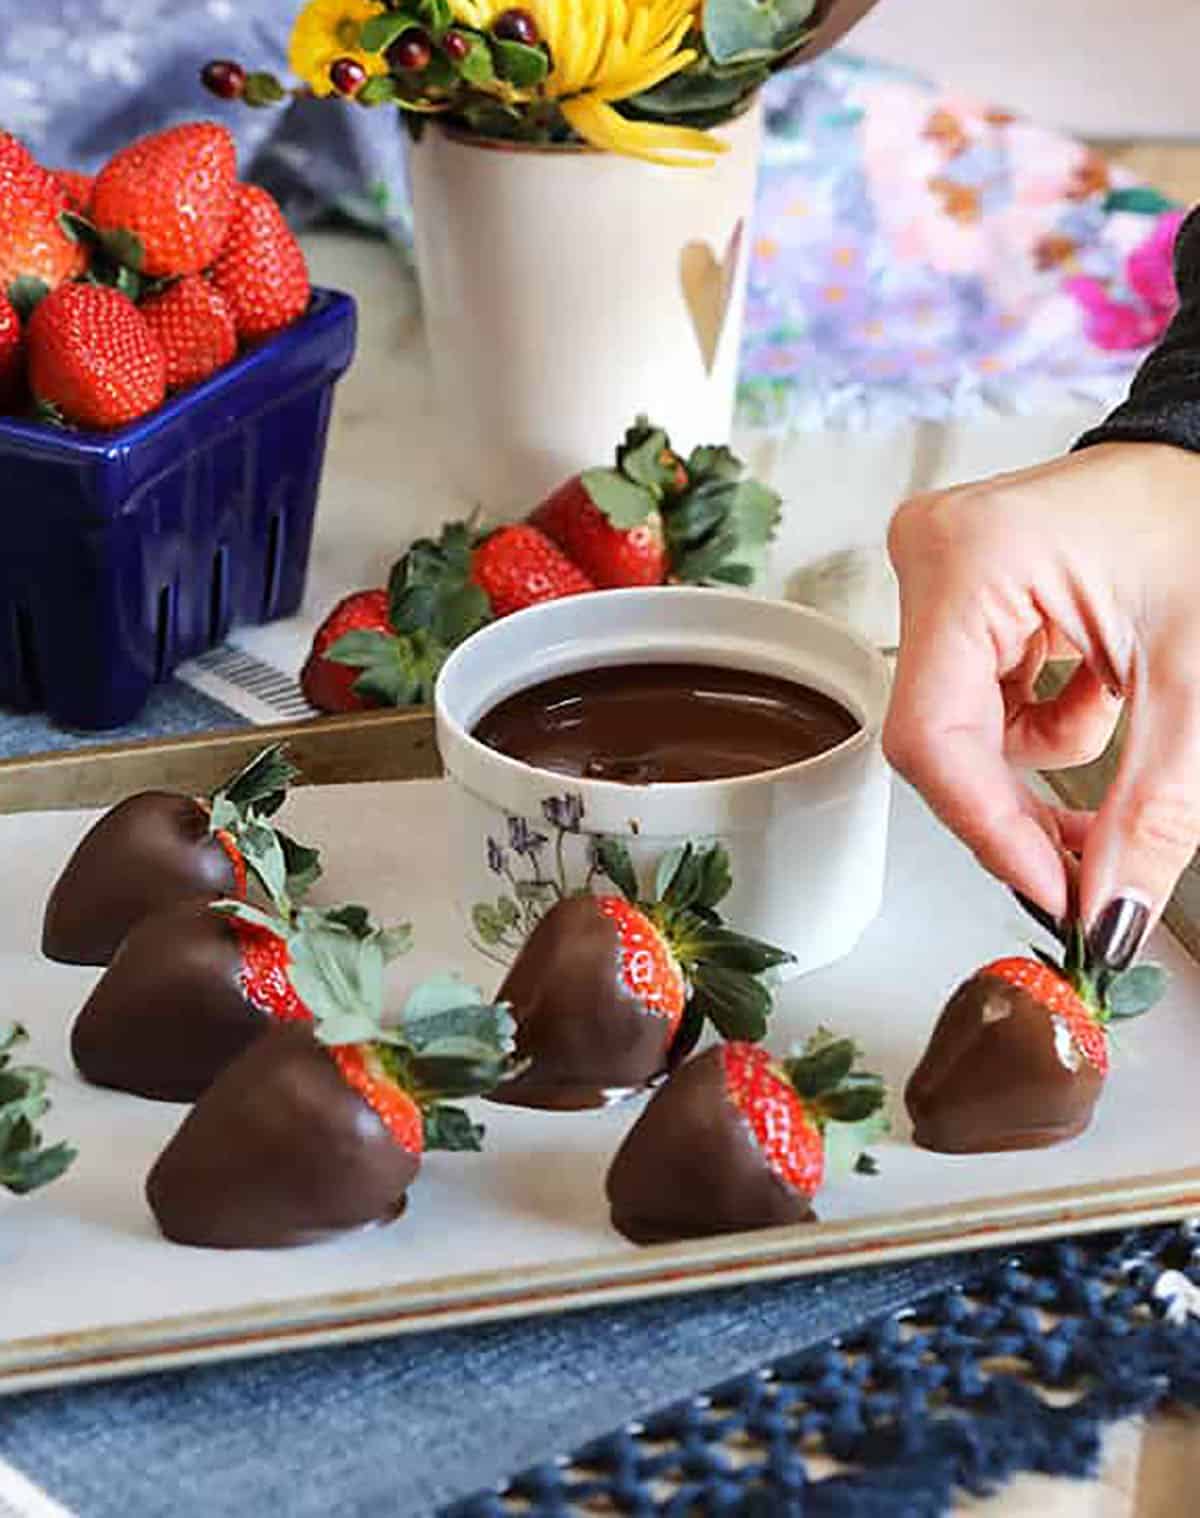 Chocolate dipped strawberries on a baking sheet lined with parchment